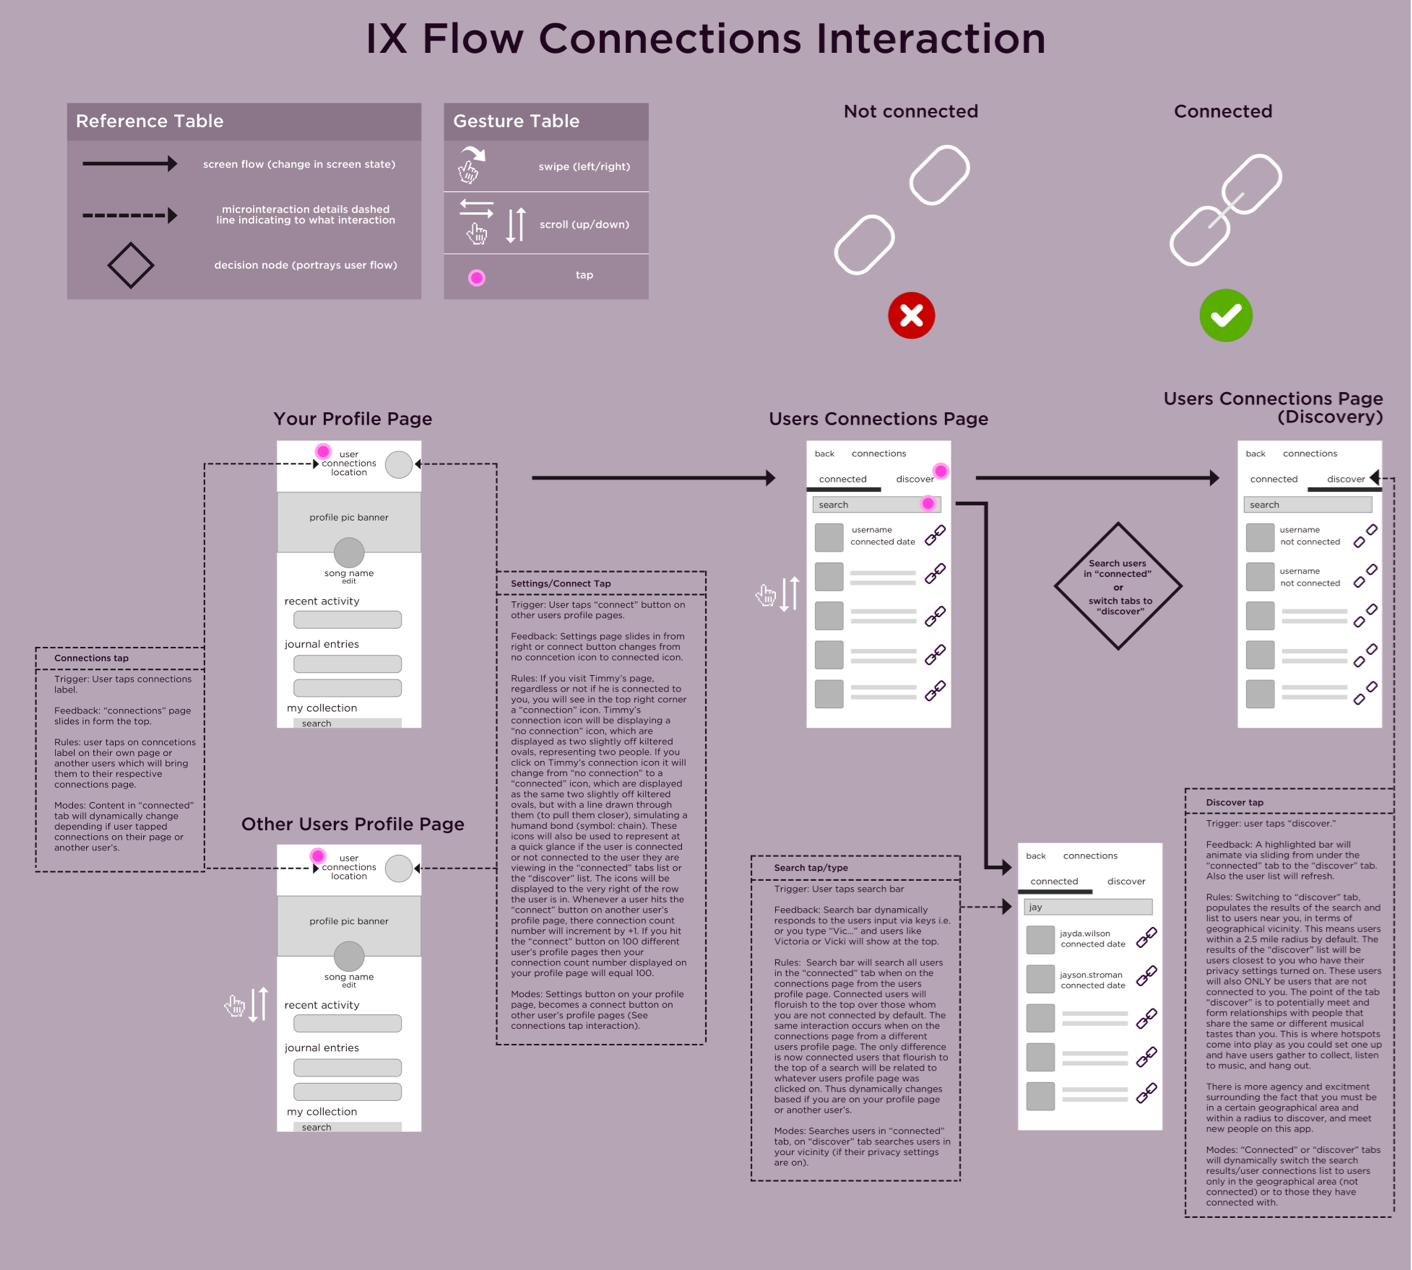 Static Image of Interaction Flow Souvinear Digital Asset for Connections Functionality of iOS App for Developers